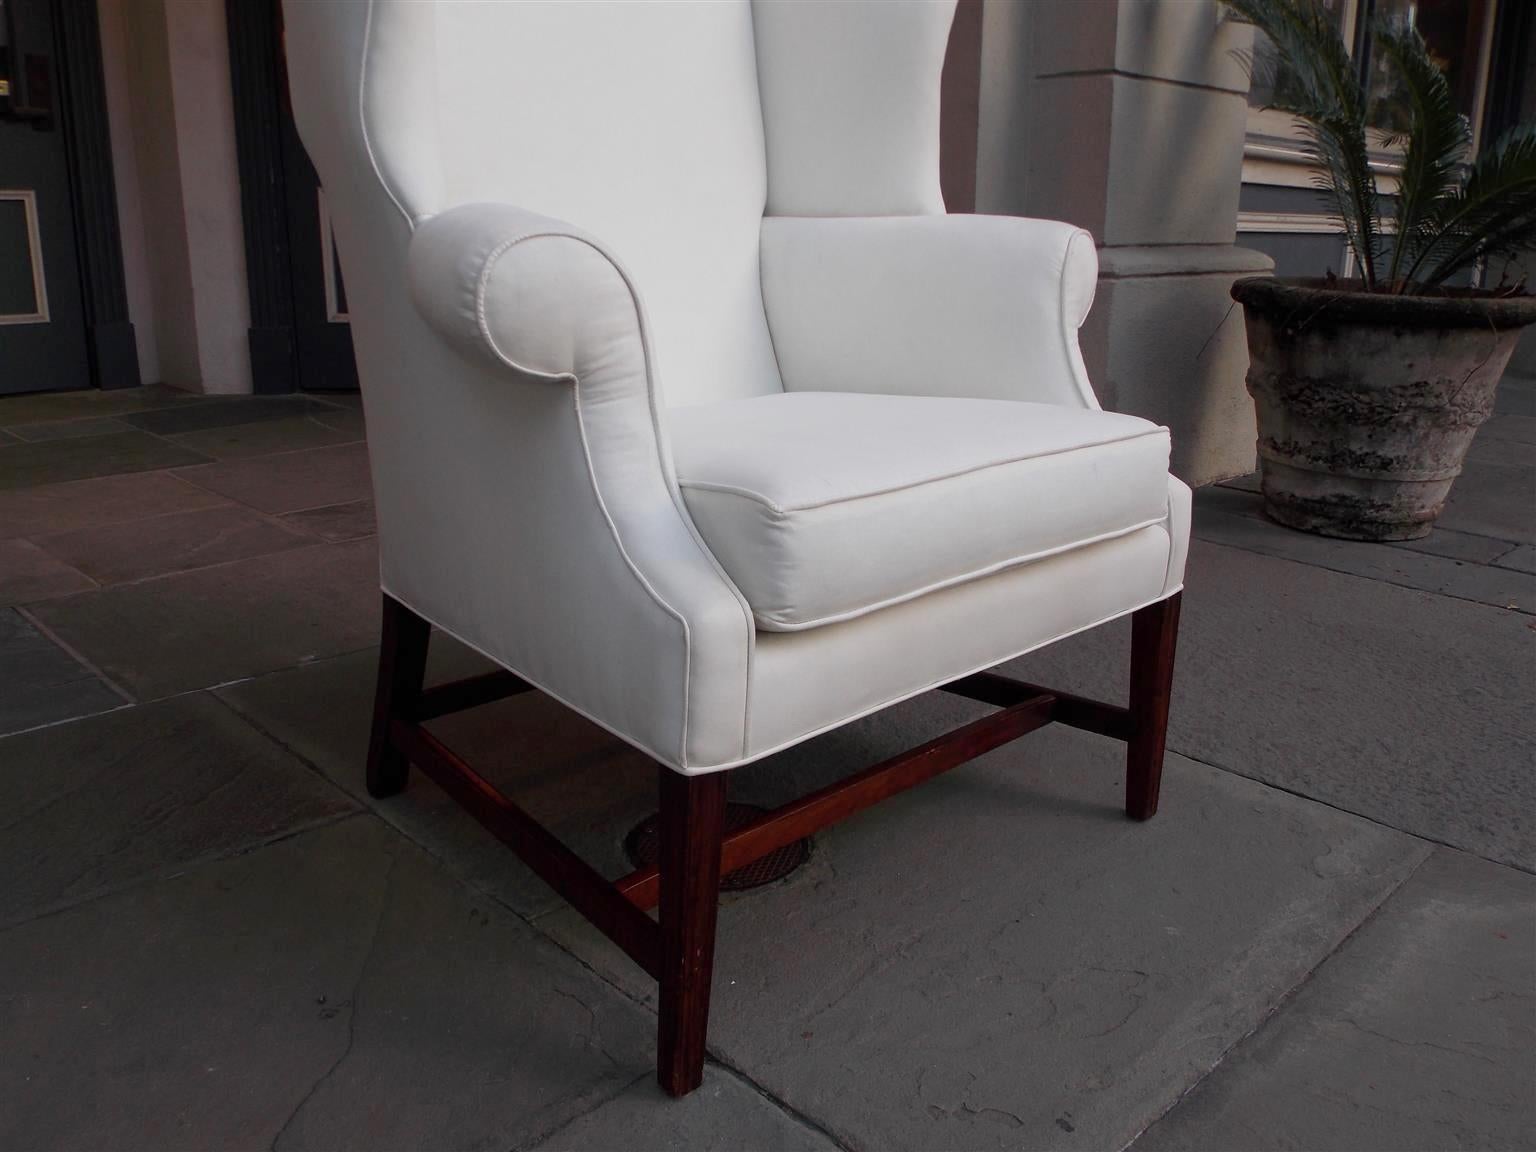 Hand-Carved American Hepplewhite Mahogany Upholstered Wing Back Chair, New York, Circa 1790